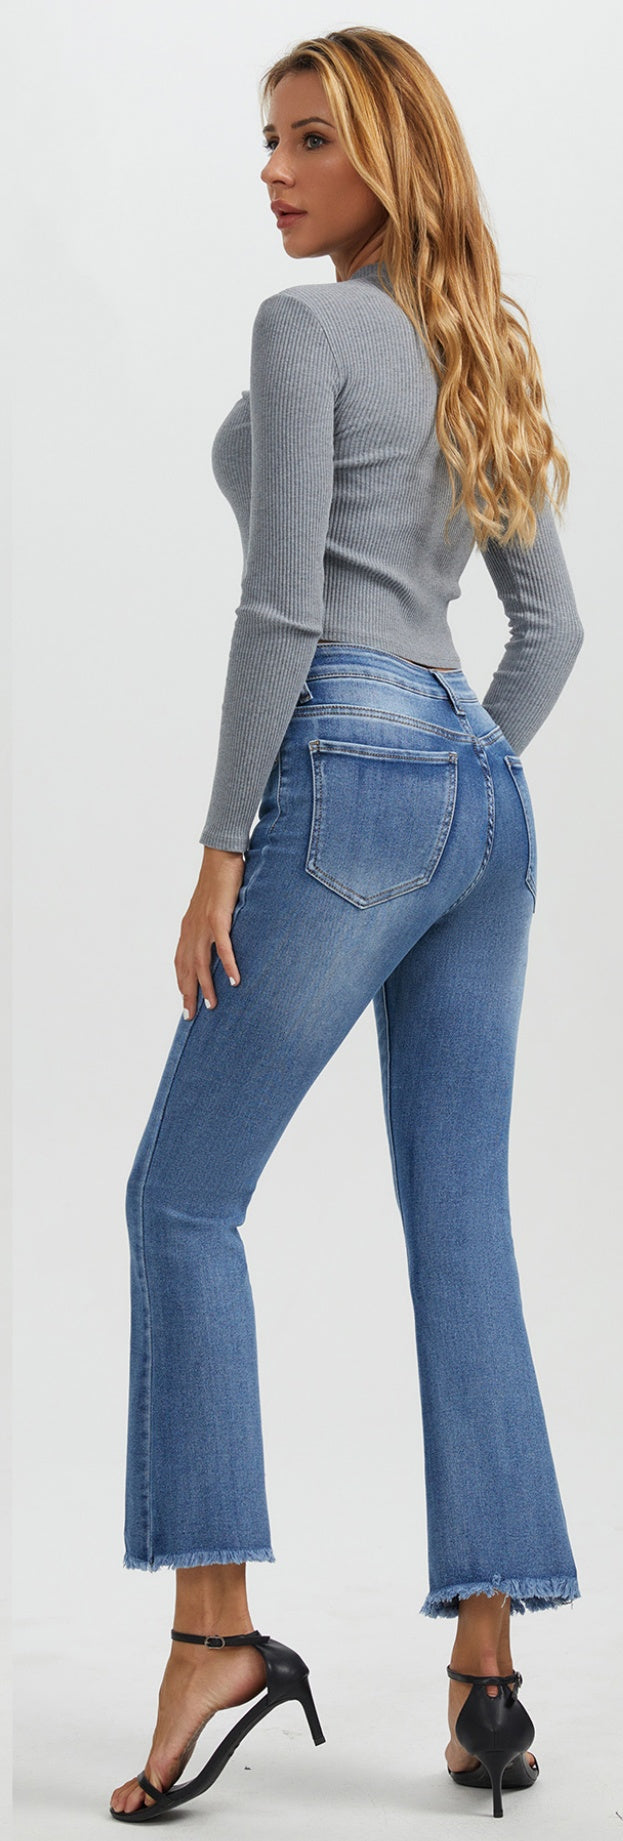 Bell Bottom Jeans for Women High Waisted Flare Jeans with Classic